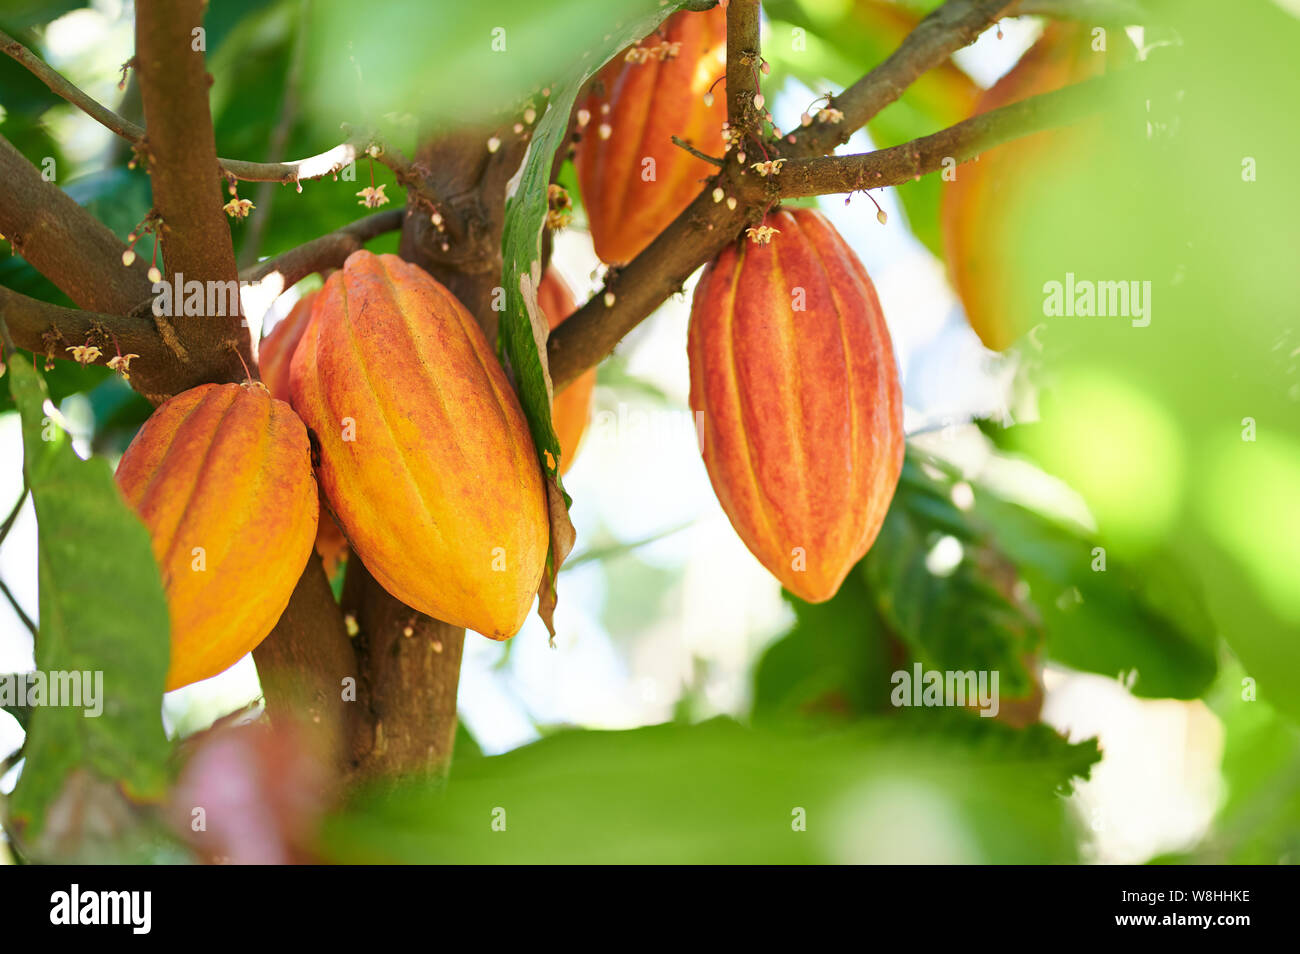 Cacao harvesting theme. Orange color cocoa pods hanging on tree in sunlight Stock Photo